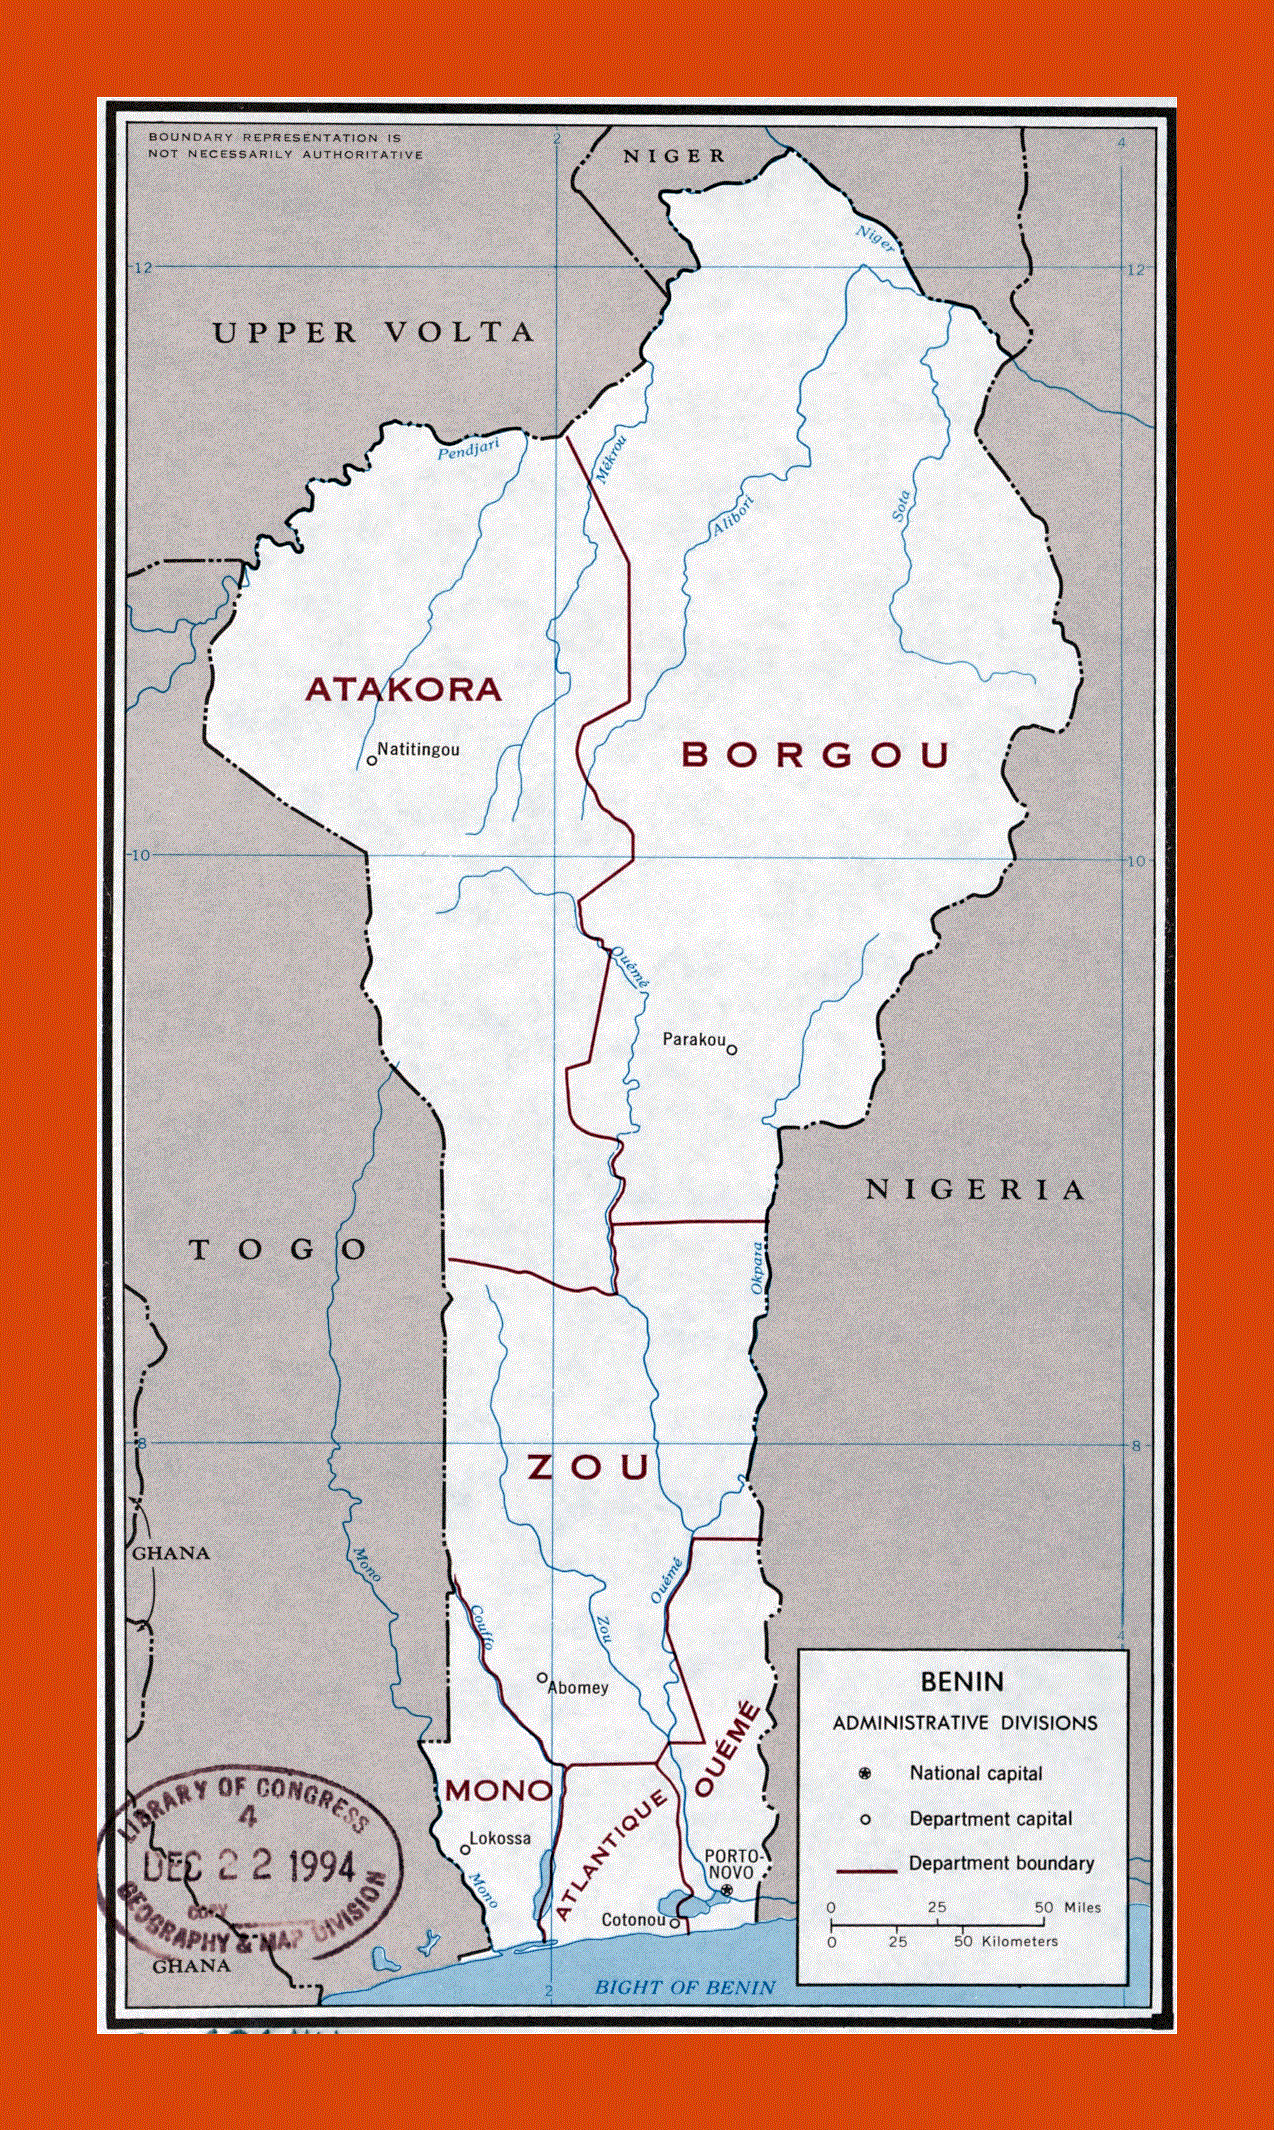 Administrative divisions map of Benin - 1977